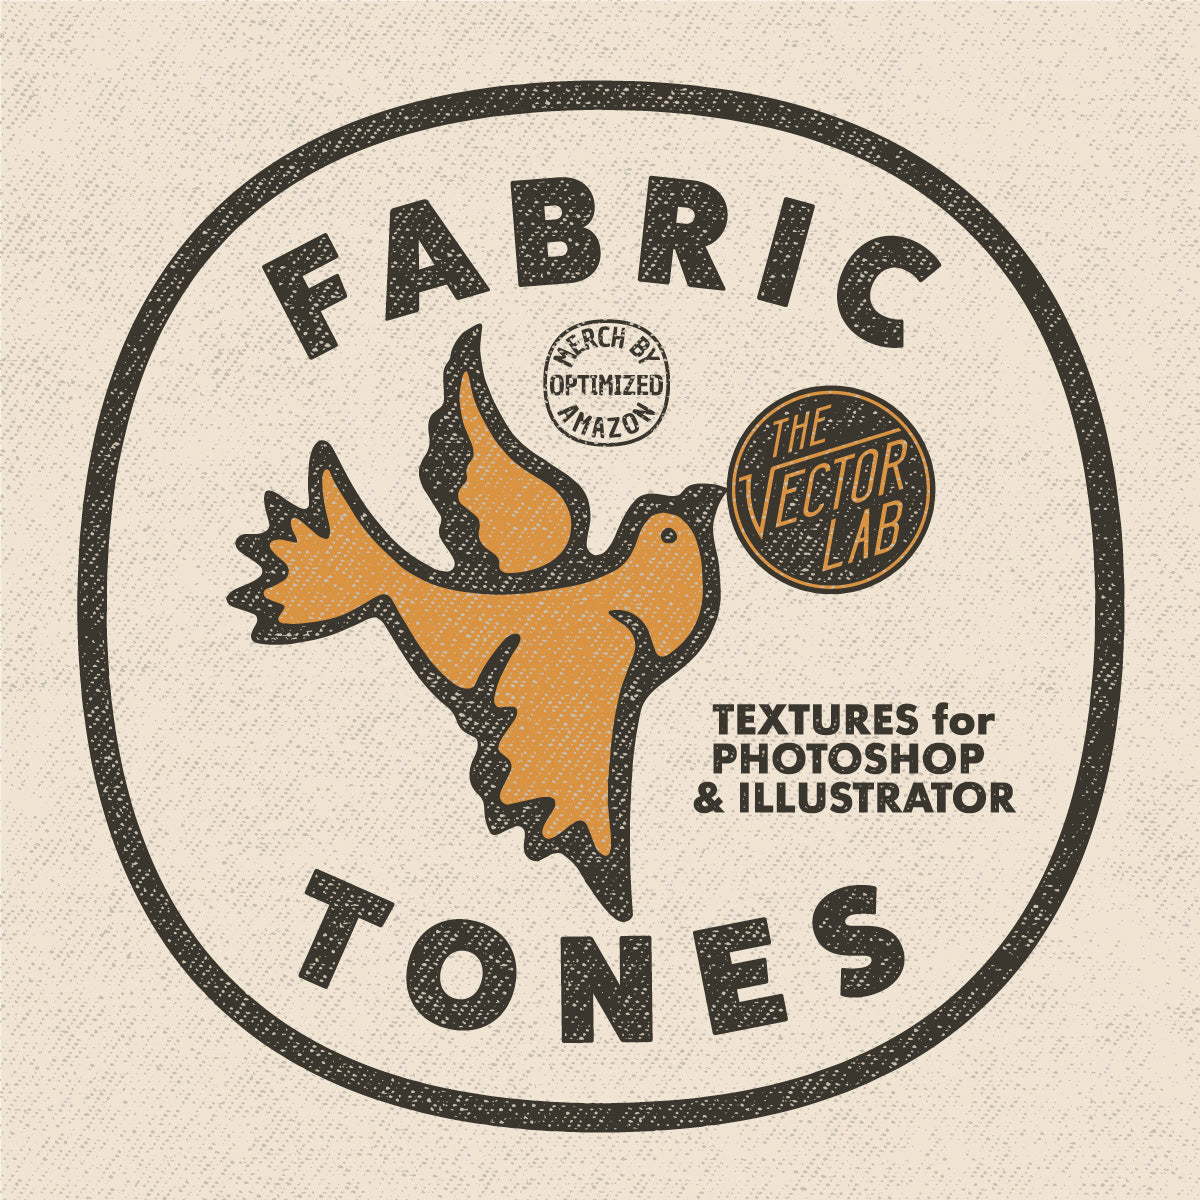 Fabric Tones Textures for Photoshop and Illustrator